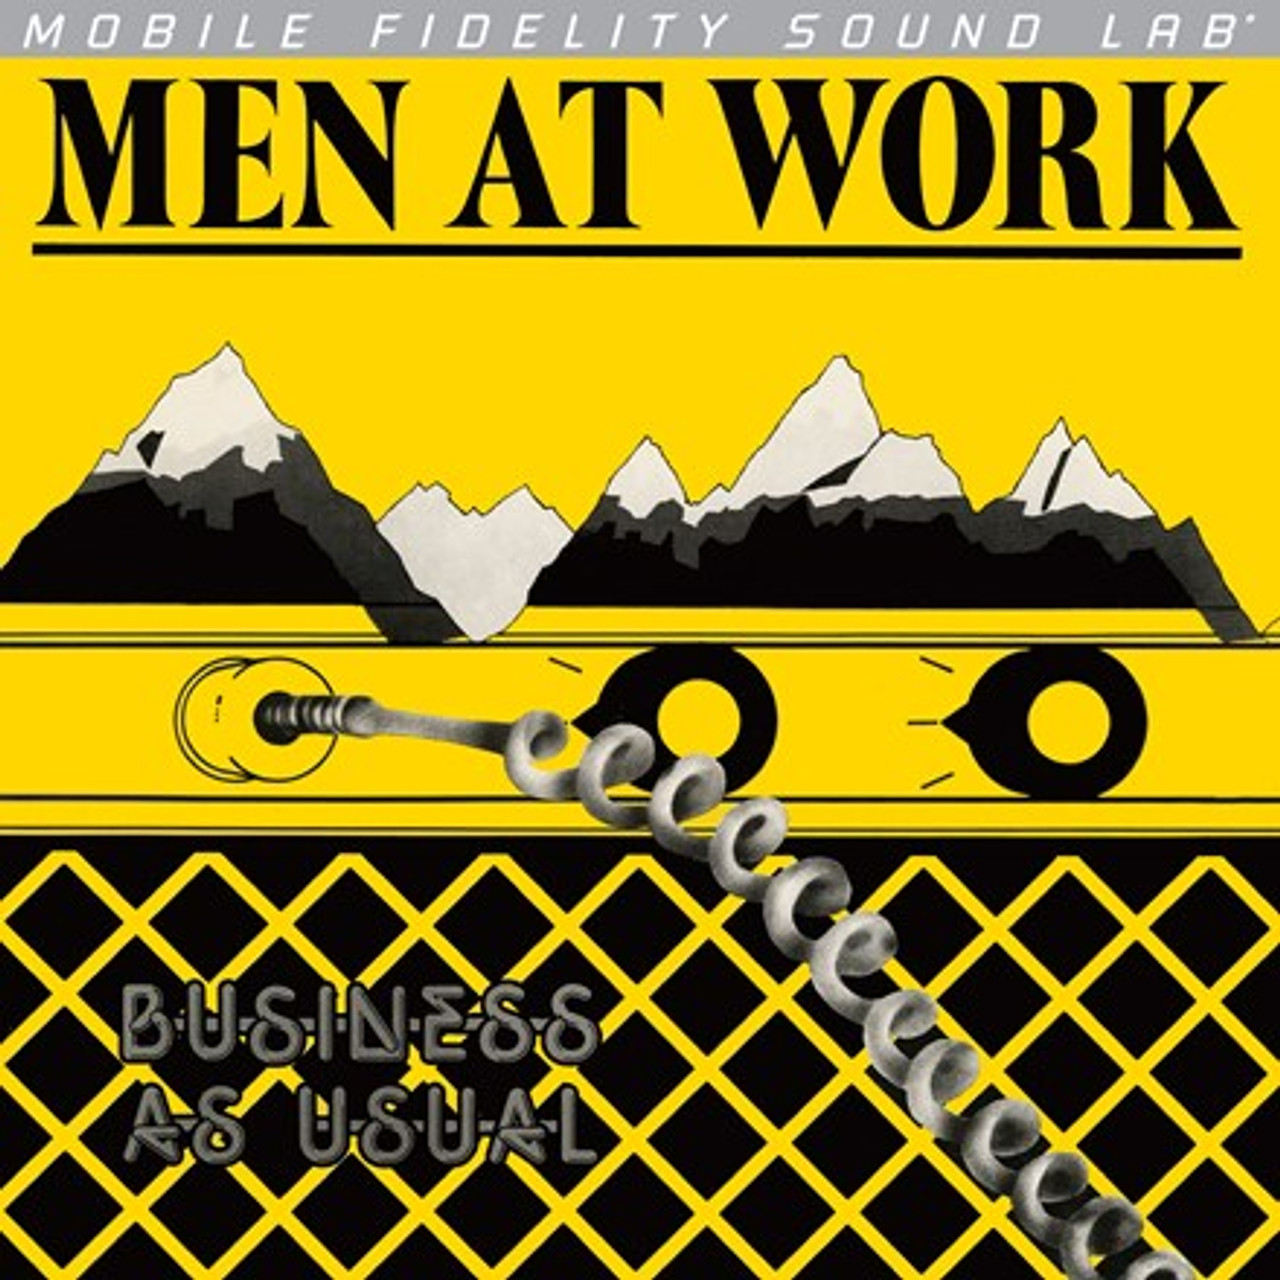 Men At Work Business As Usual (Numbered Vinyl LP) Music Direct